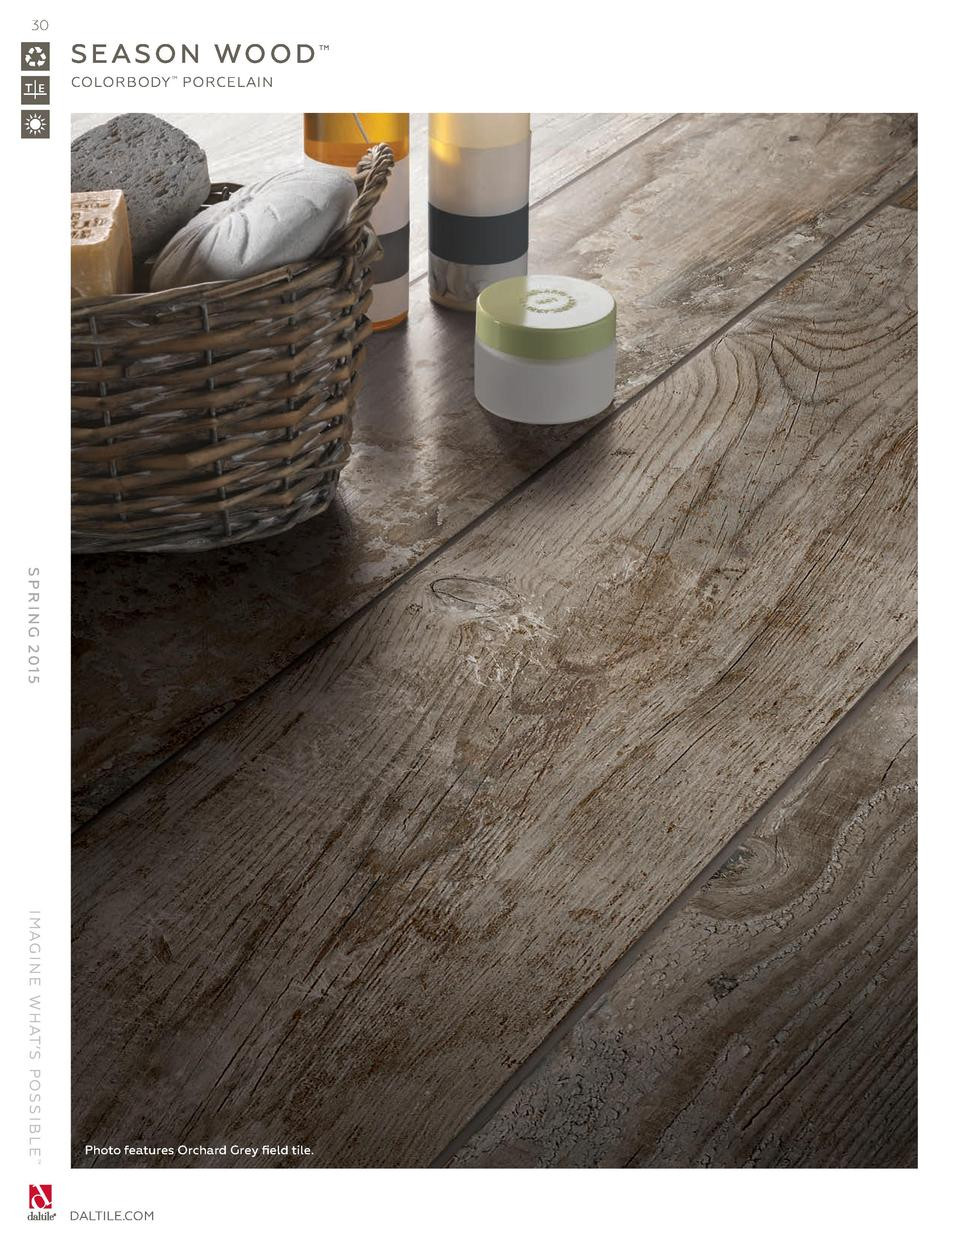 26 Best Hardwood Floor with Contrasting Border 2024 free download hardwood floor with contrasting border of daltile spring 2015 catalog simplebooklet com intended for 30 s e a s o n wo o d colorbody porcelain s p r i n g 2 01 5 i mag i n e w hat s po